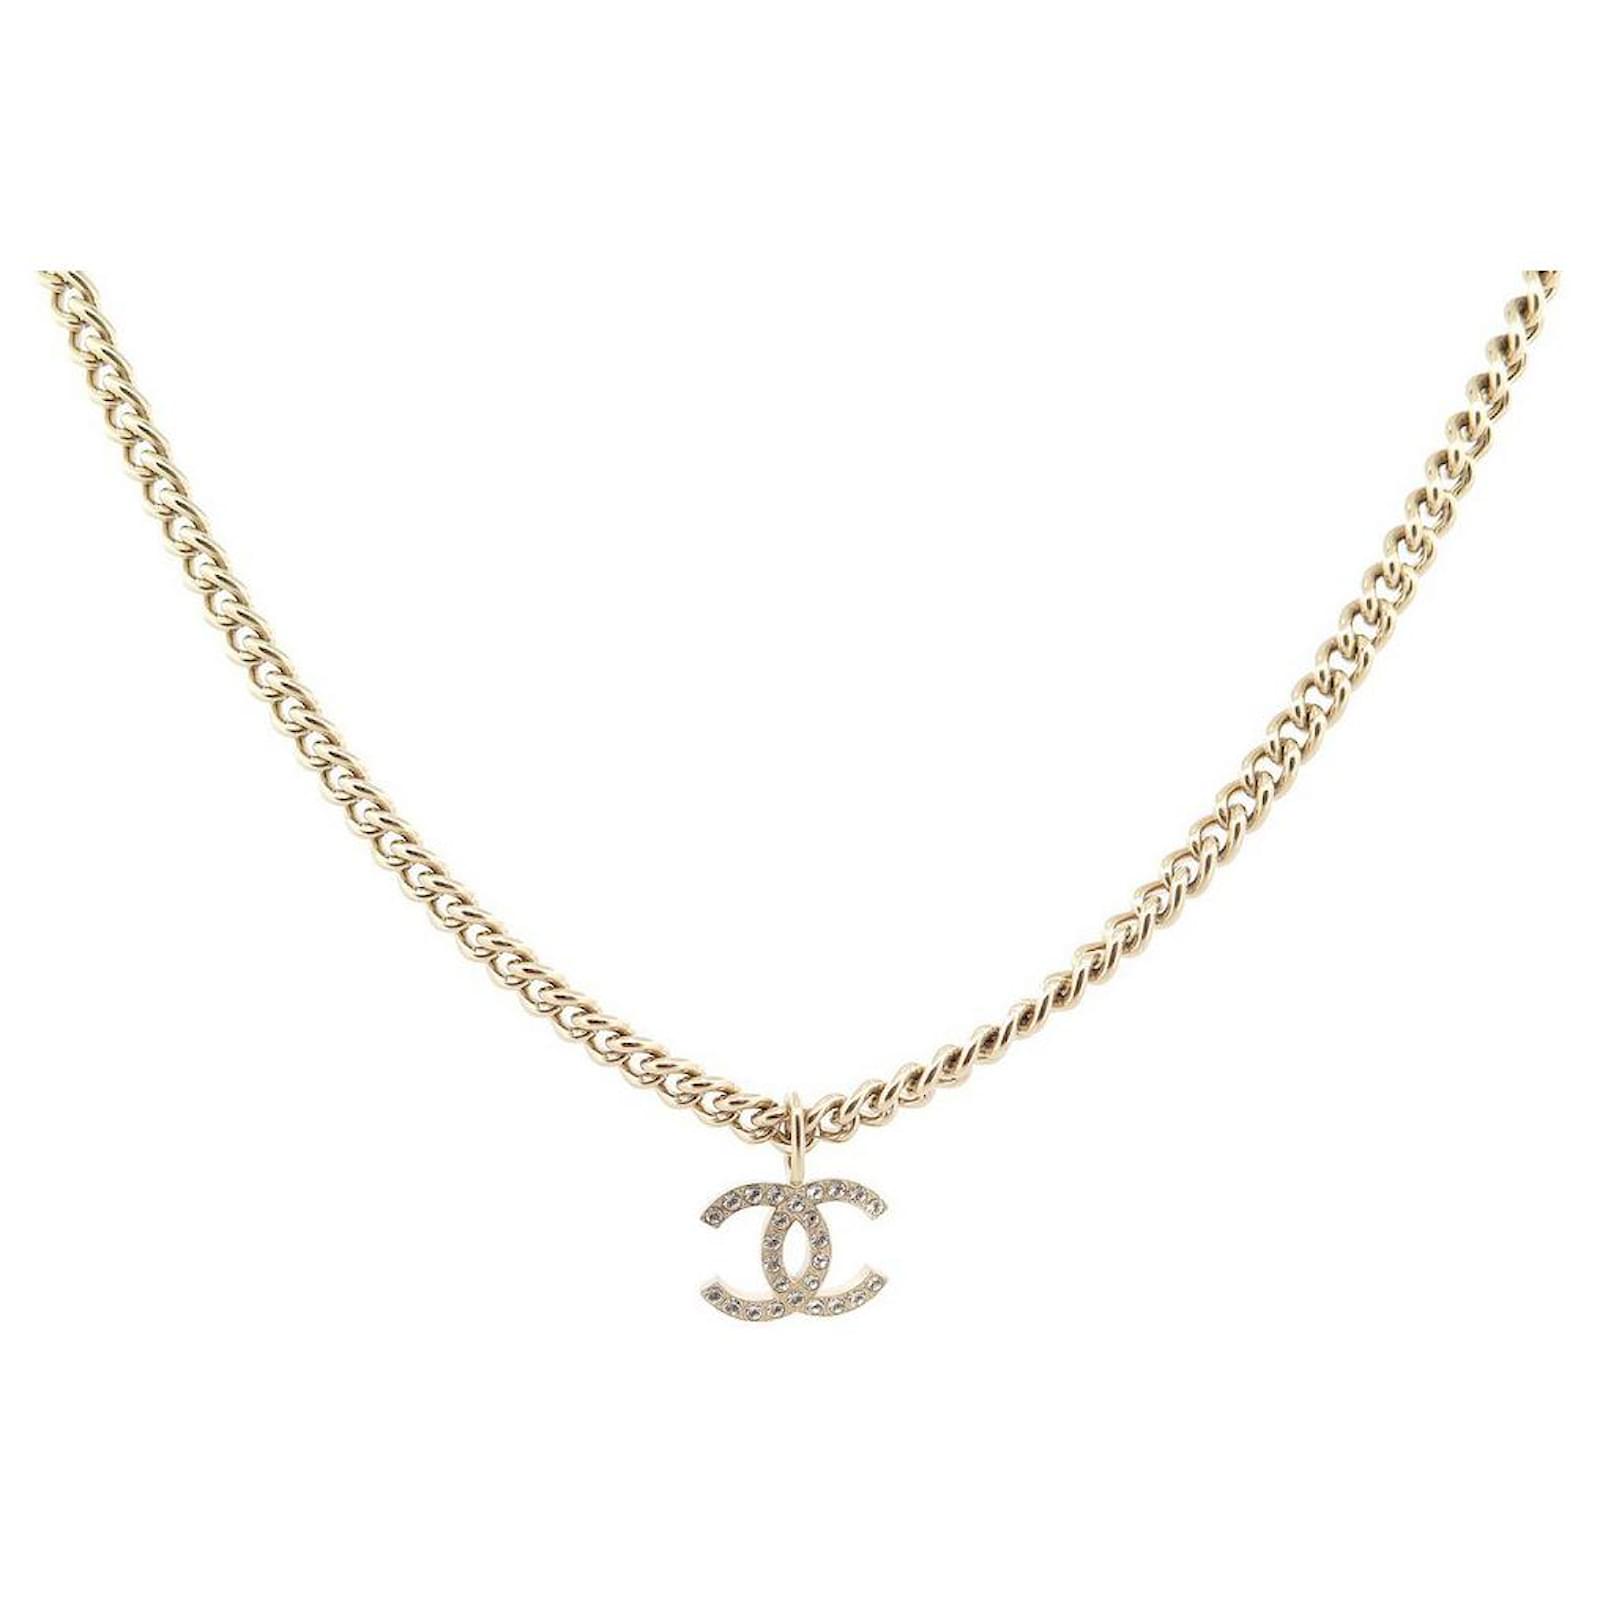 NEW CHANEL NECKLACE CHAIN LOGO CC IN GOLD METAL & STRASS NEW